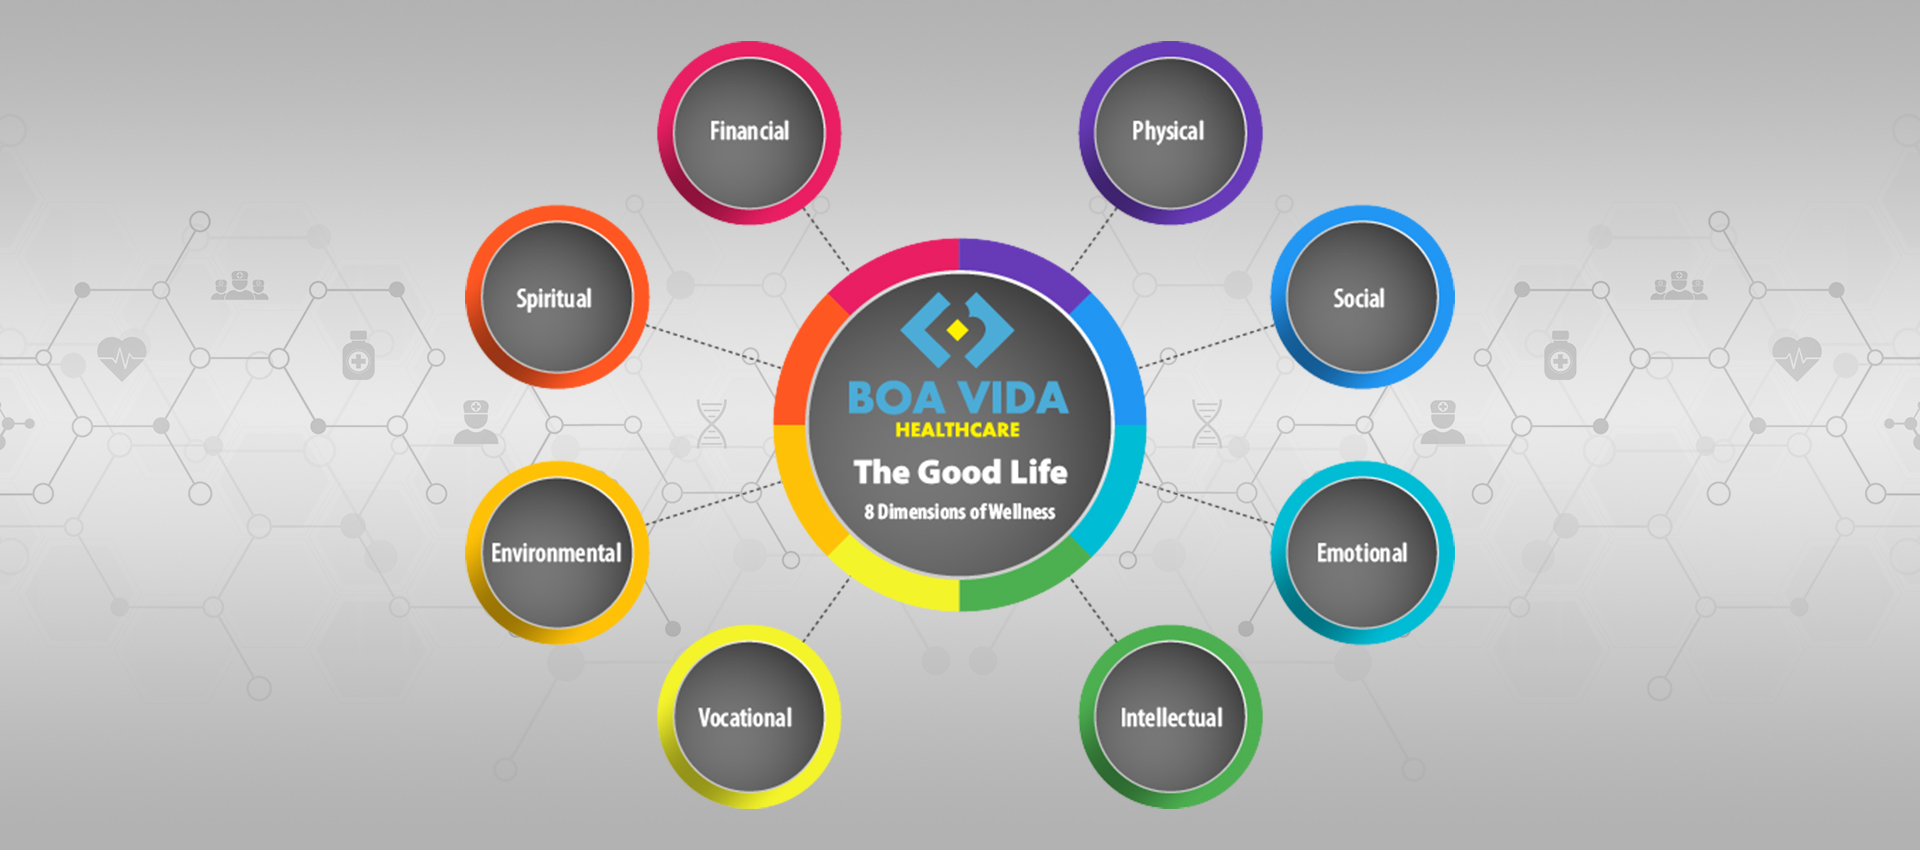 The Good Life - 8 Dimensions of Wellness